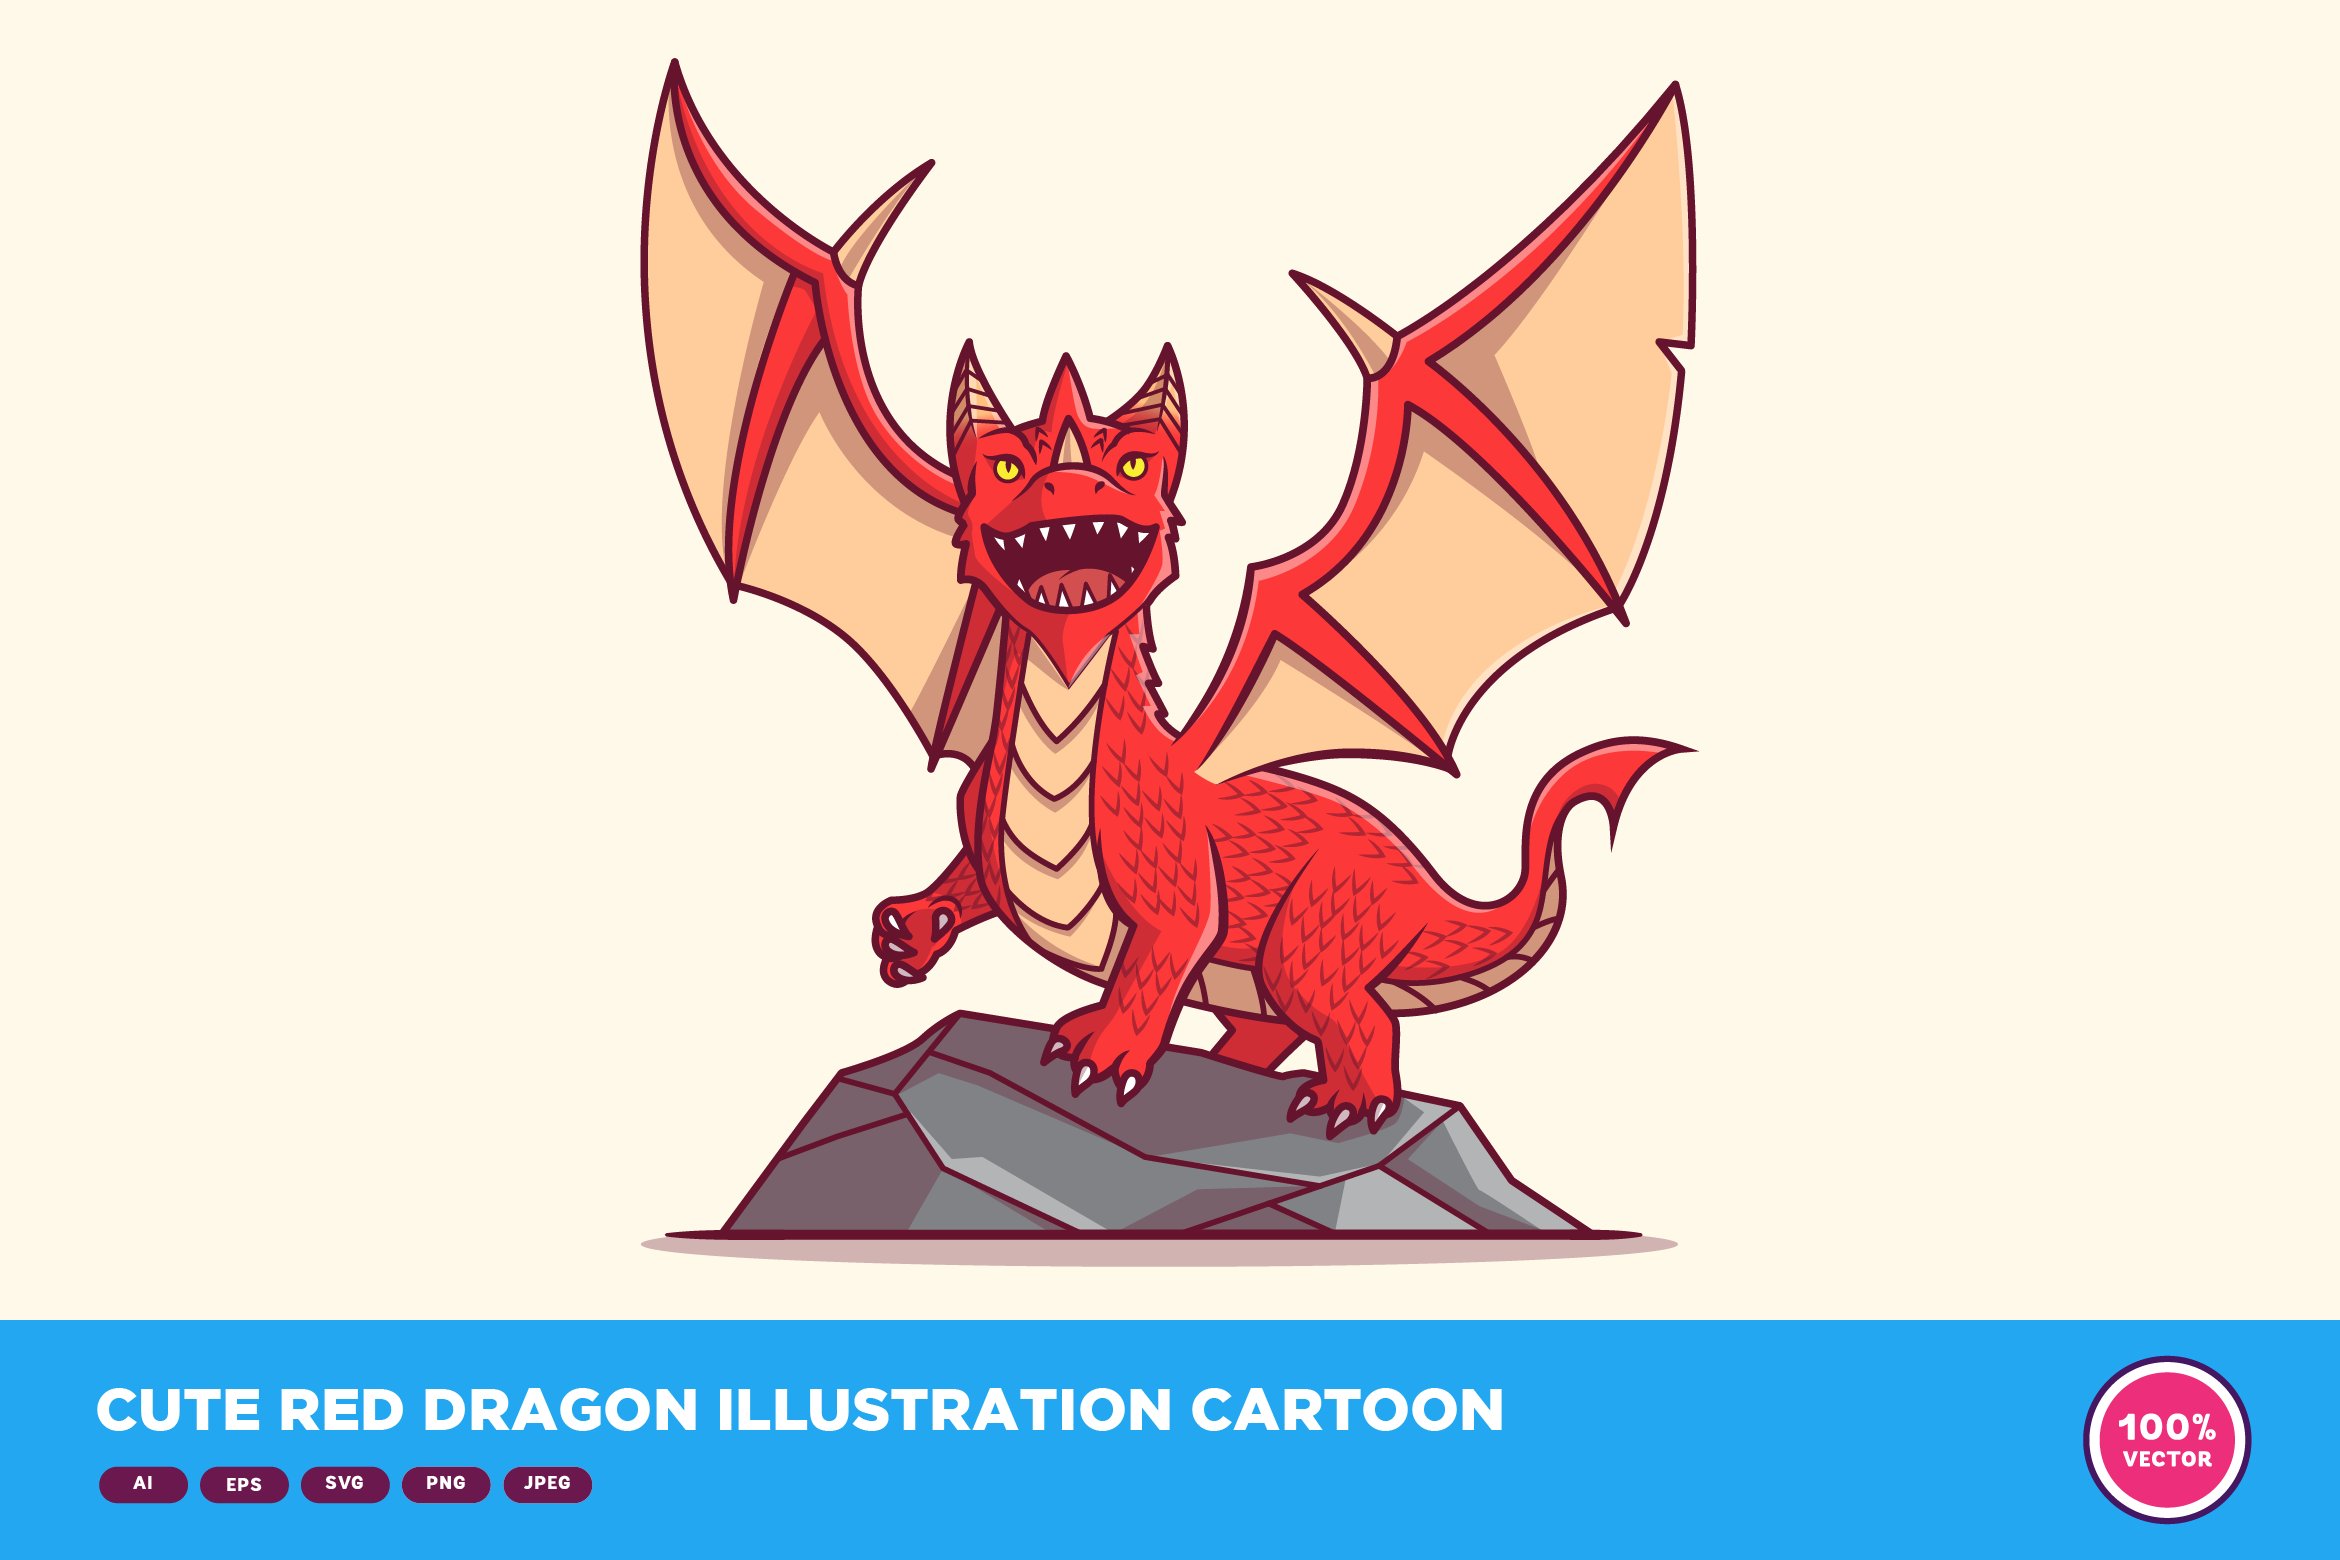 Cute Red Dragon Illustration Cartoon cover image.